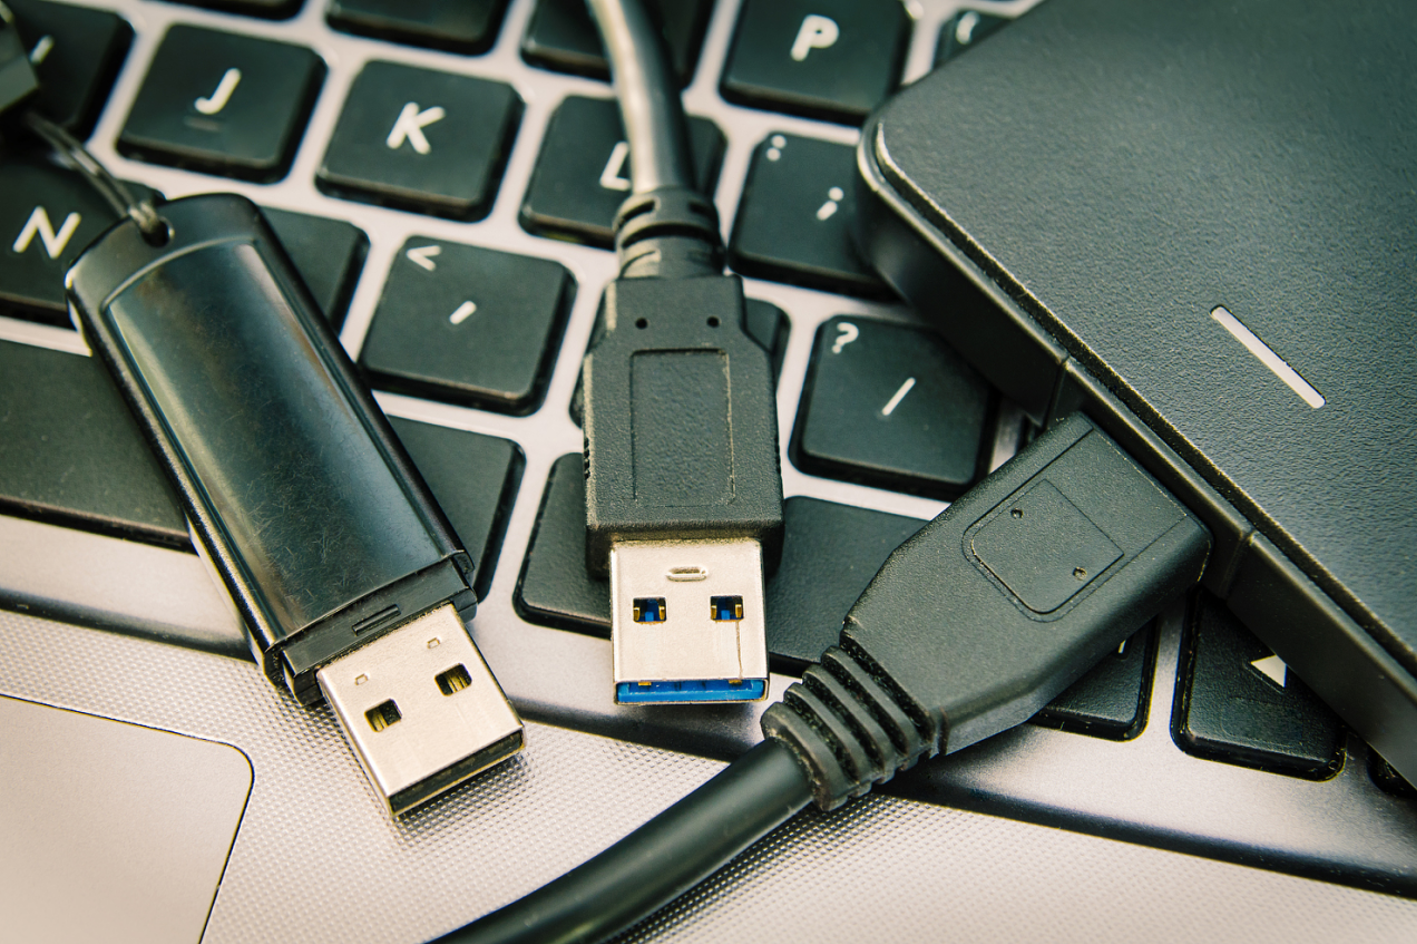 USB-A vs. USB-B vs. USB-C: What is the Difference?